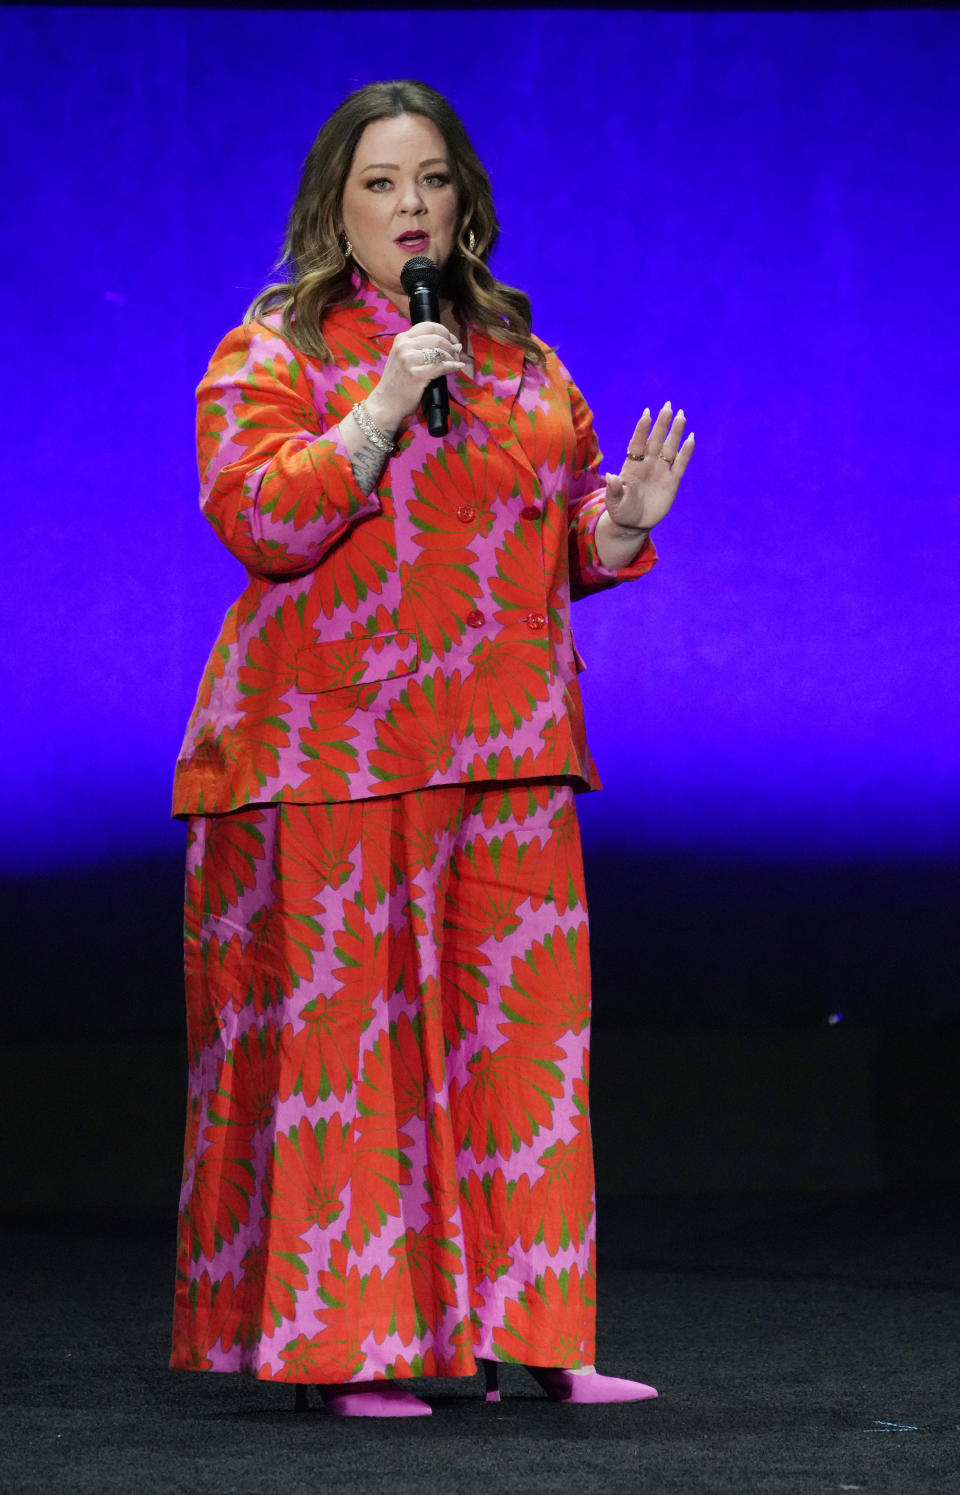 Melissa McCarthy, a cast member in the upcoming film "The Little Mermaid," introduces a clip from the film during the Walt Disney Studios presentation at CinemaCon 2023, the official convention of the National Association of Theatre Owners (NATO) at Caesars Palace, Wednesday, April 26, 2023, in Las Vegas. (AP Photo/Chris Pizzello)